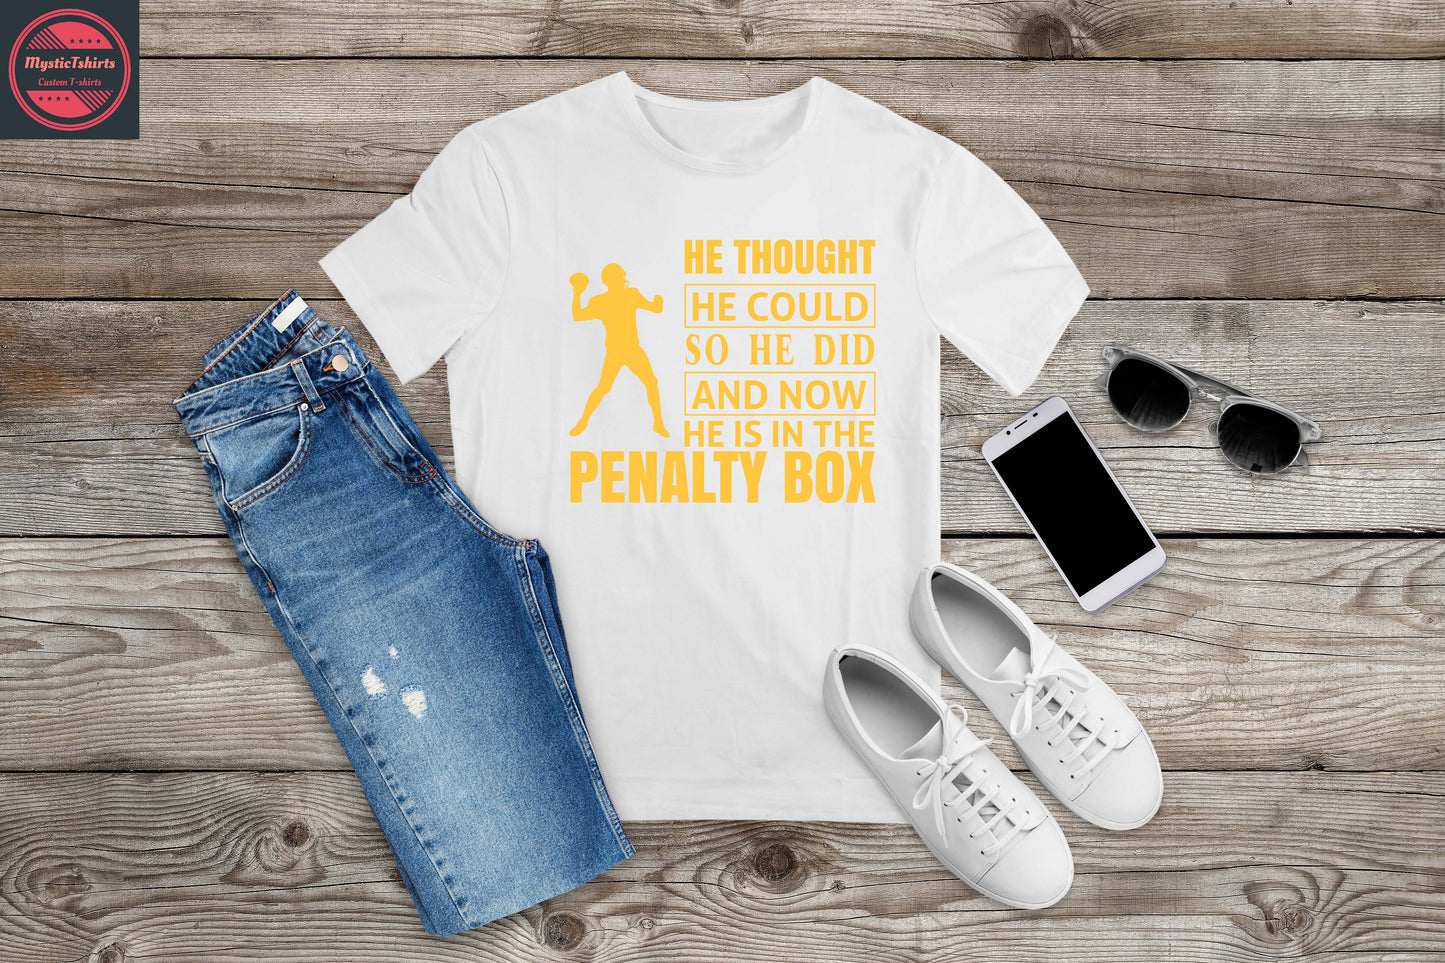 193. HE THOUGHT HE COULD SO HE DID AND NOW HE IS IN THE PENALTY BOX, Custom Made Shirt, Personalized T-Shirt, Custom Text, Make Your Own Shirt, Custom Tee